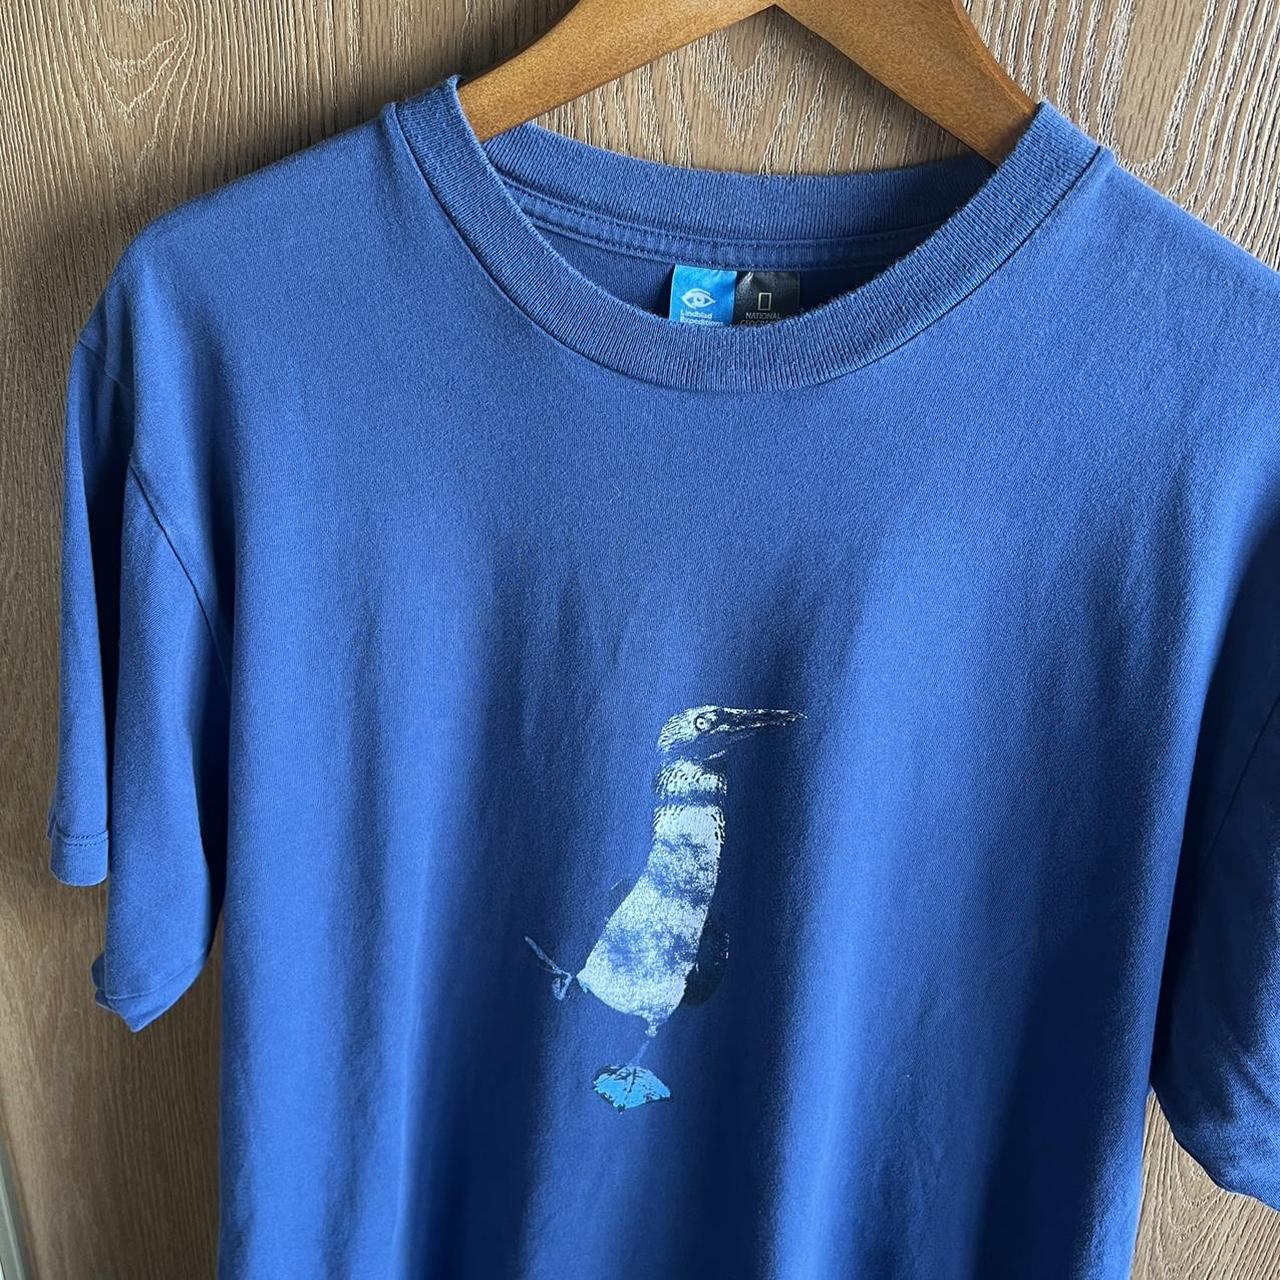 Vintage 2000s National Geographic nature tee in a... - Depop